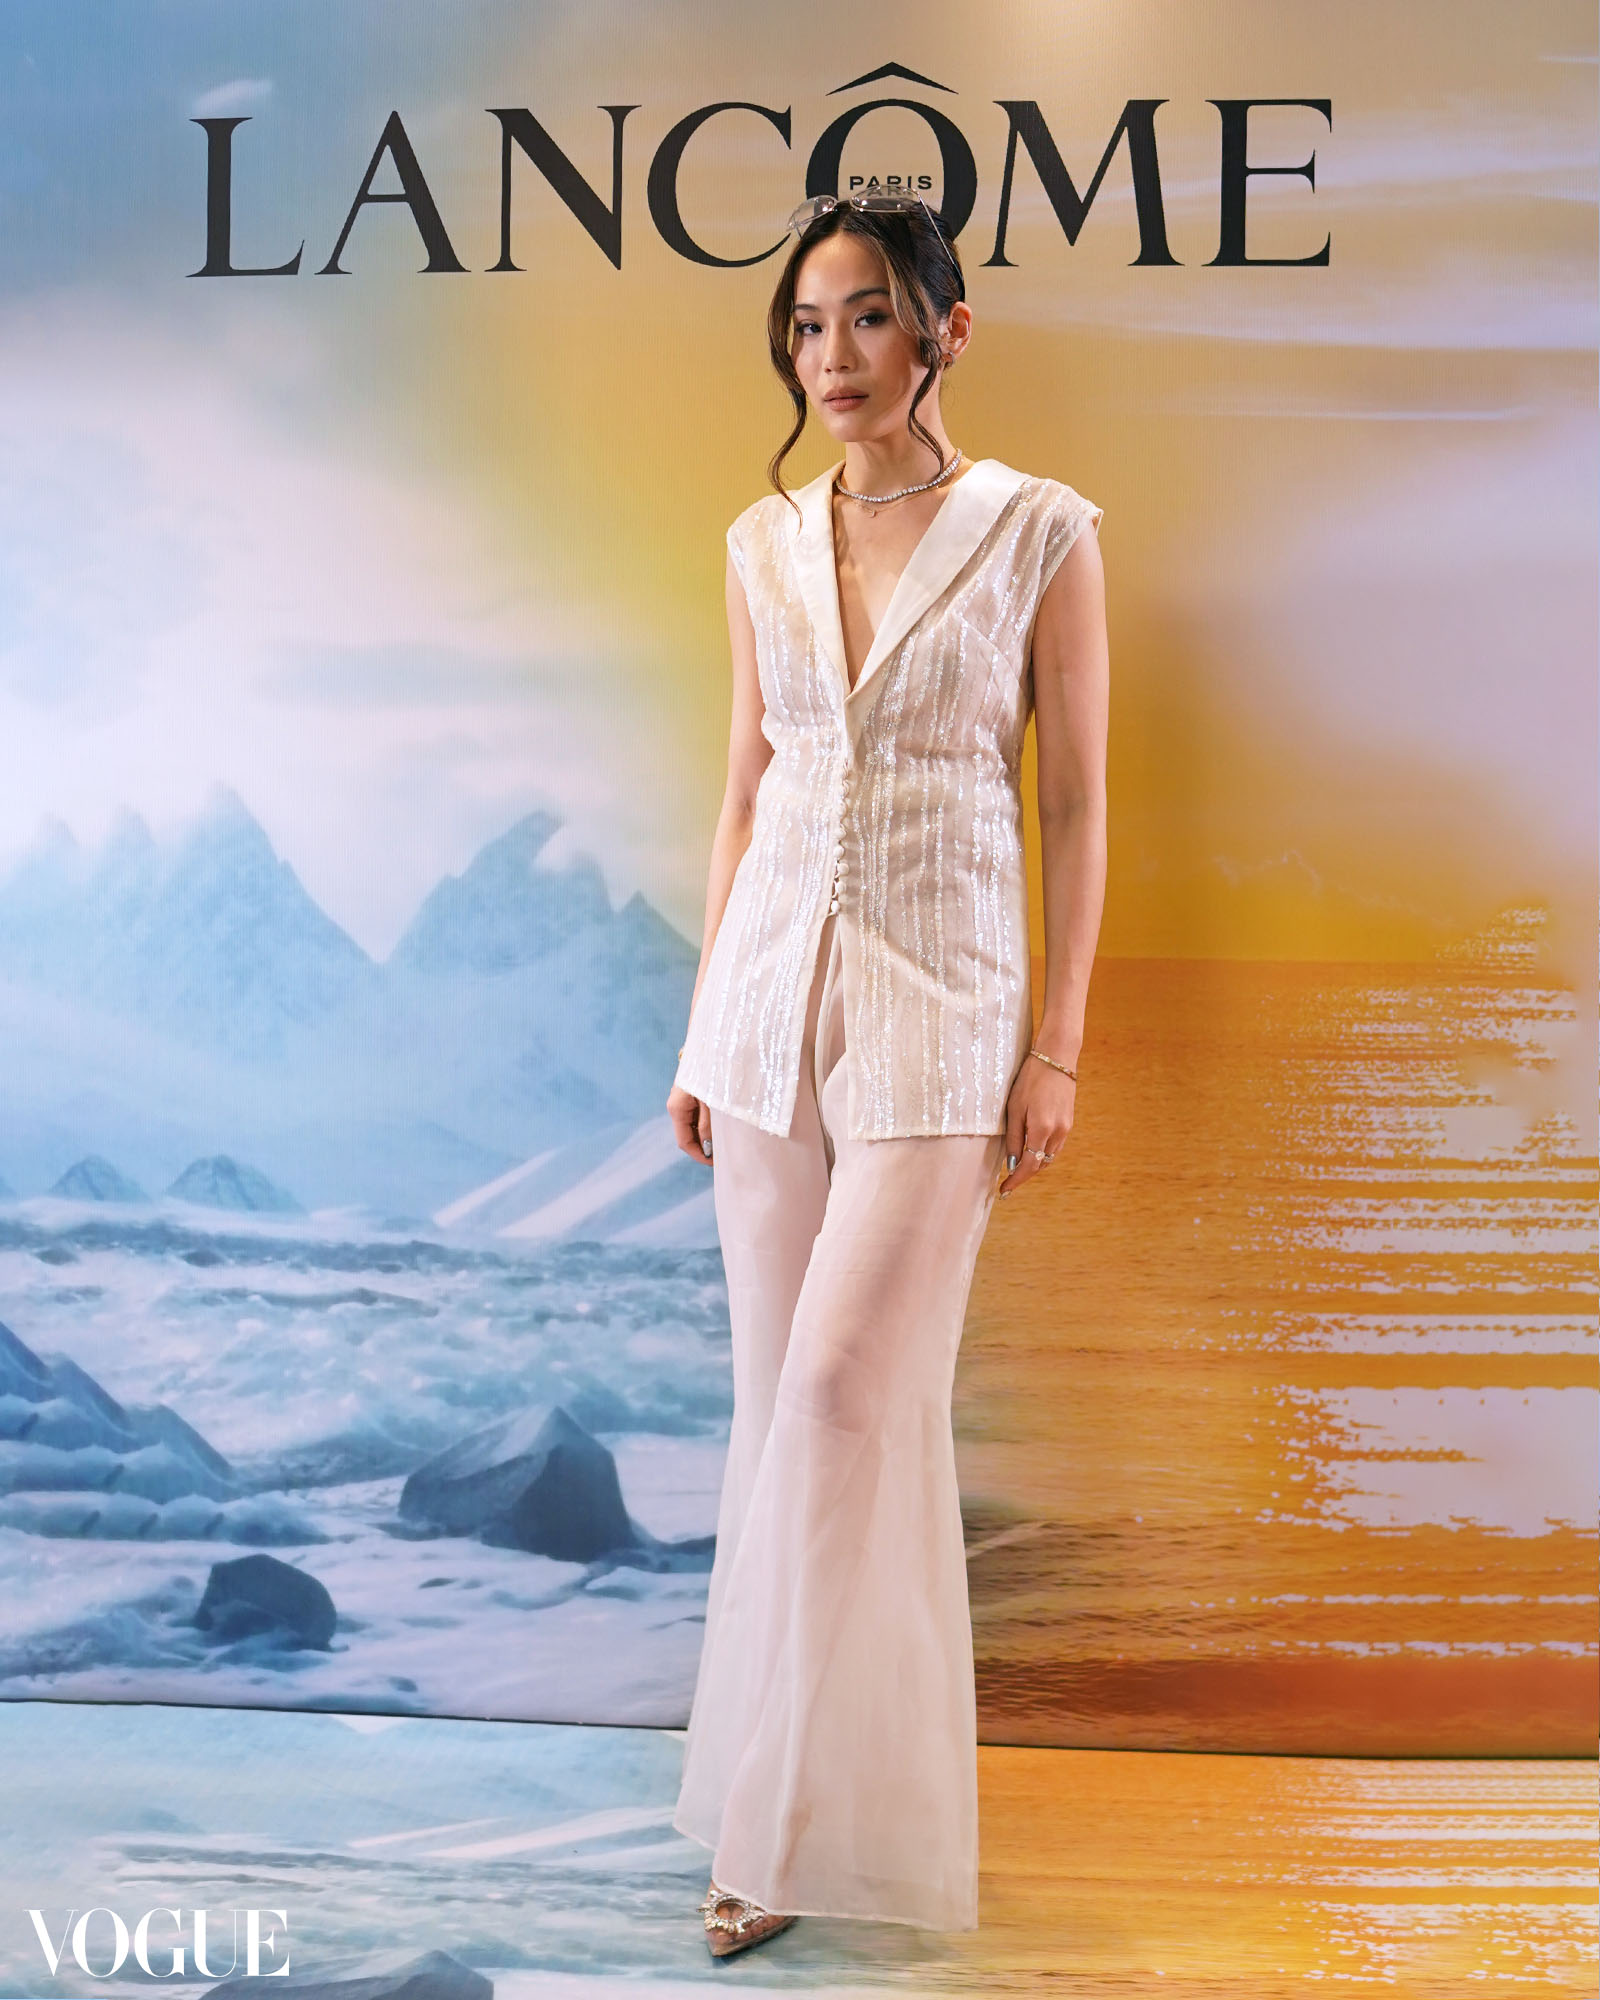 Jaz Reyes wearing a sparkly vest top and piña pants attends the Lancôme launch in the Philippines